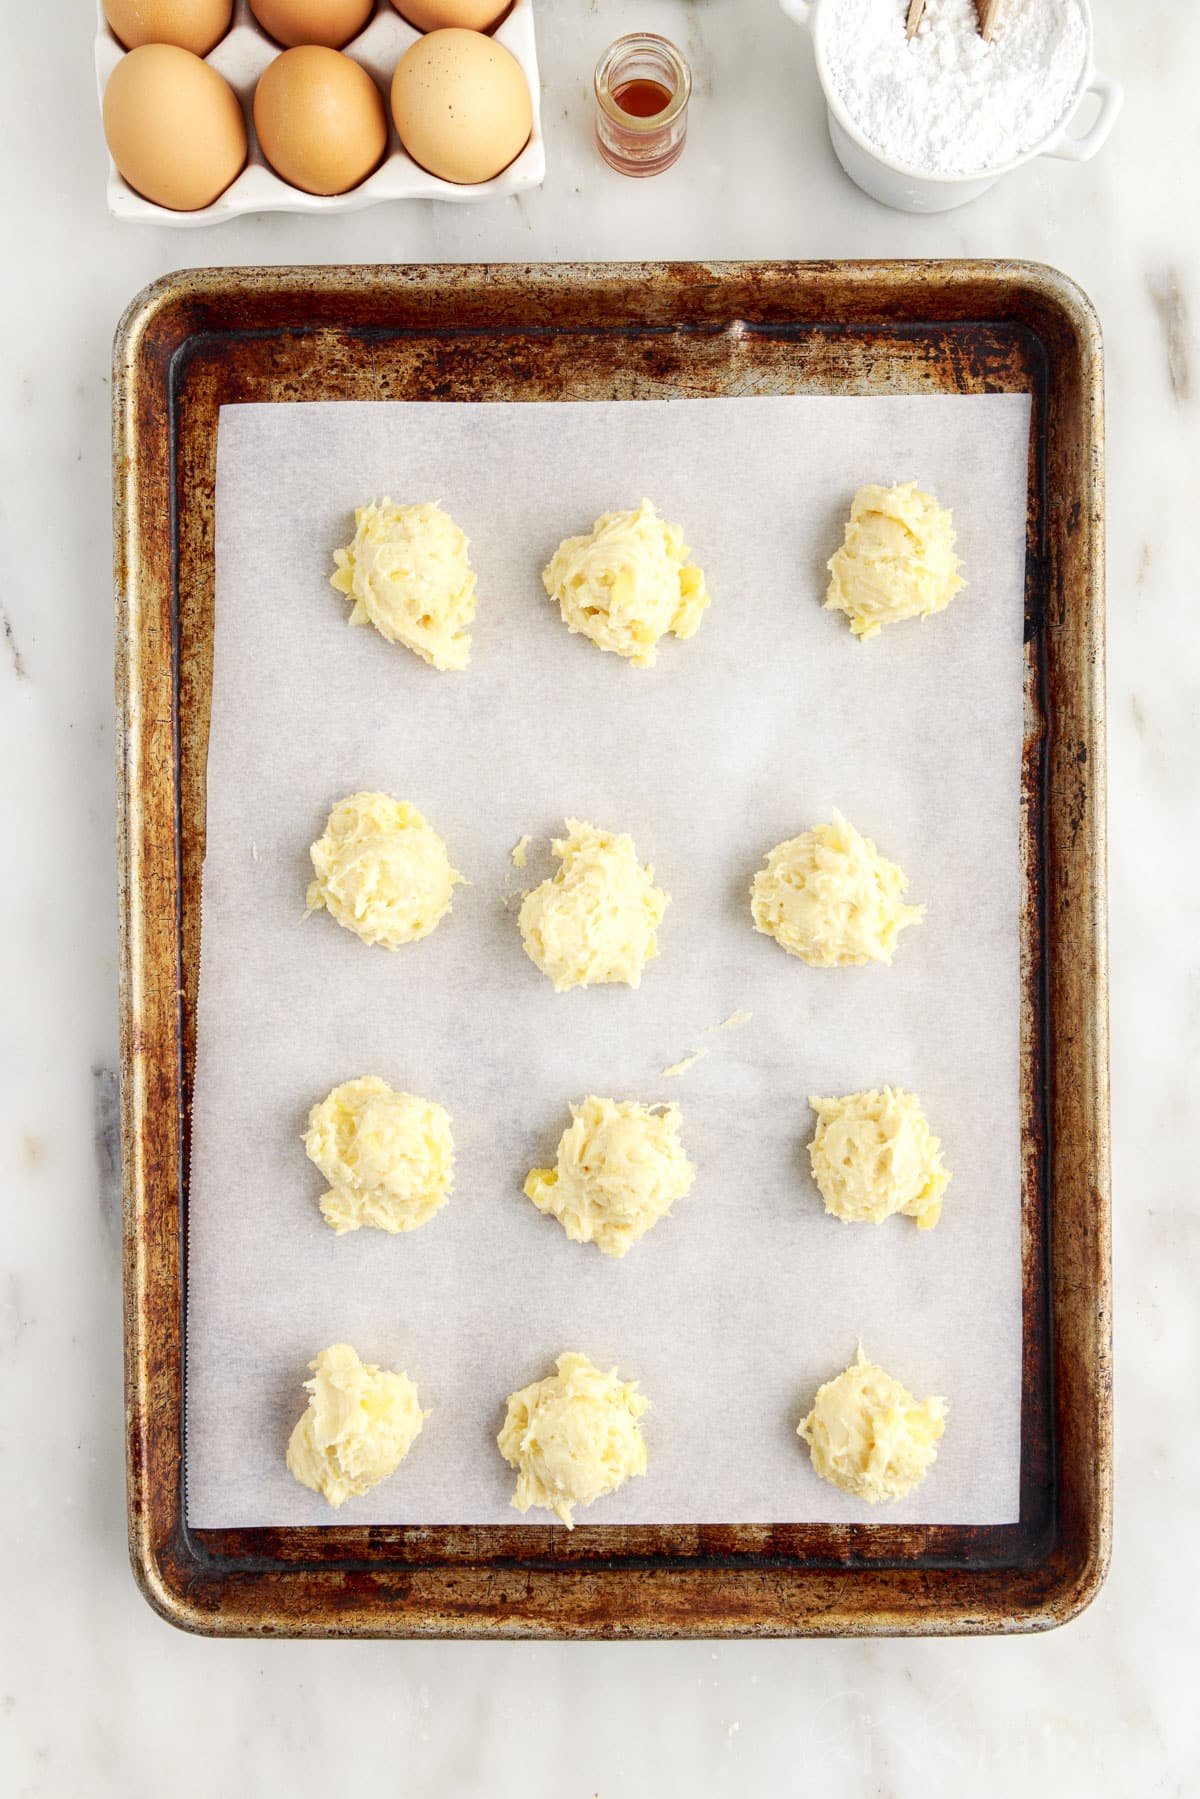 Pineapple Cookie dough balls on parchment paper lined cookie sheet.